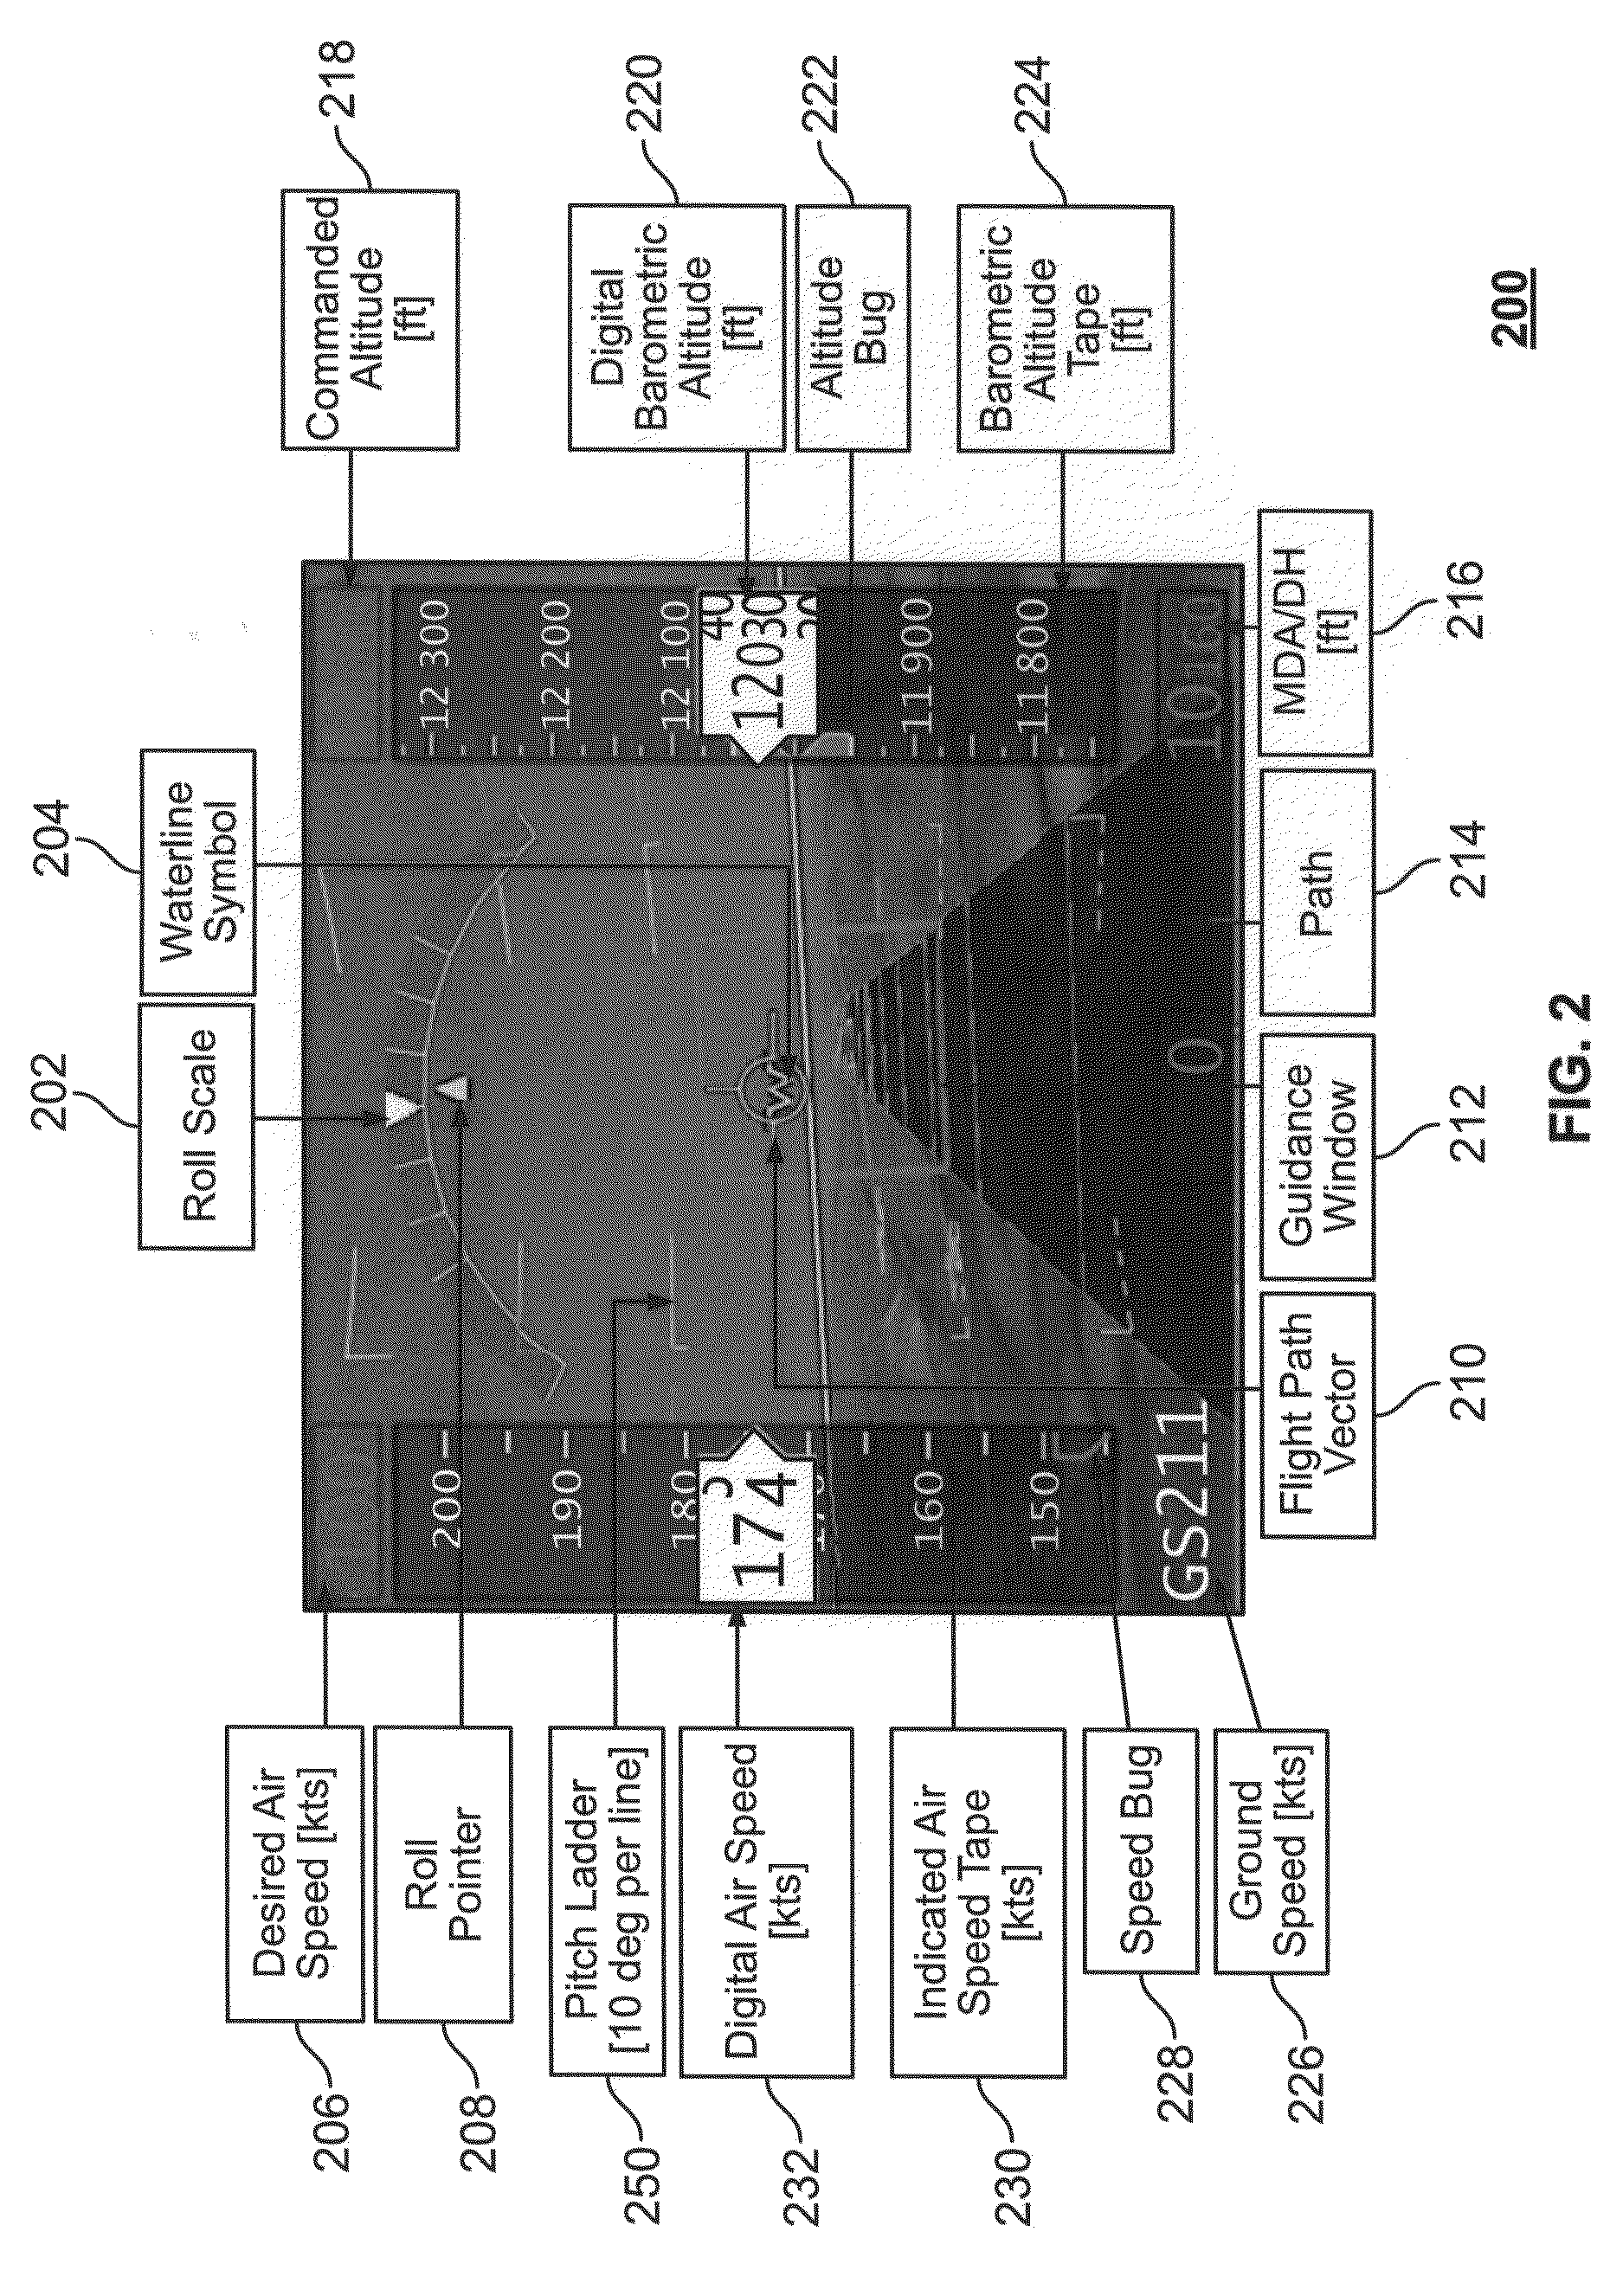 Synthetic vision system and methods